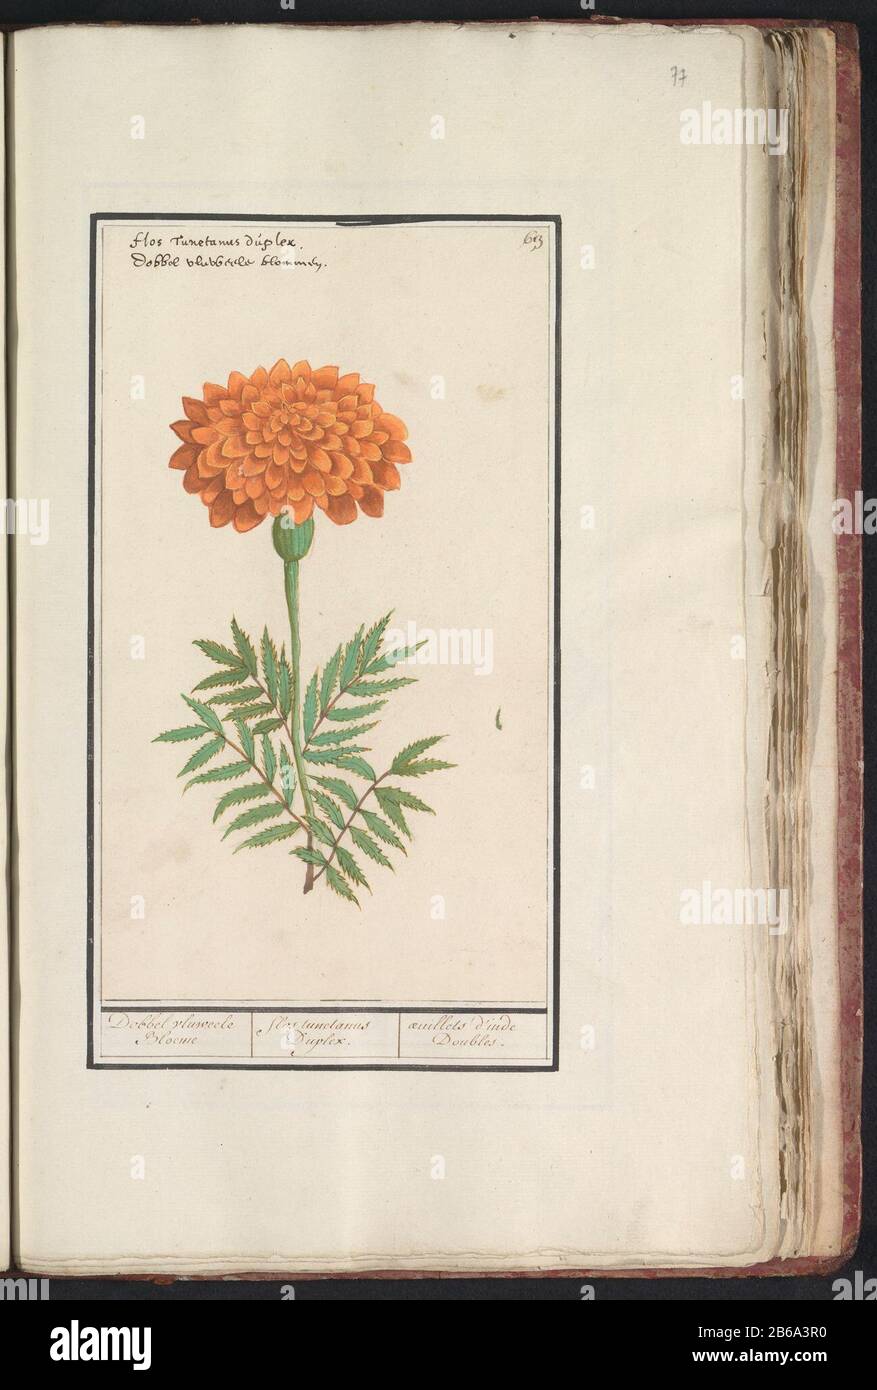 (Tagetes) Dice vluweele Bloeme Flos tunetanus Duplex Oeuilles Doubles (title object) Orange African marigold. Numbered top right: Top left the Latin and Dutch name. Part of the first album